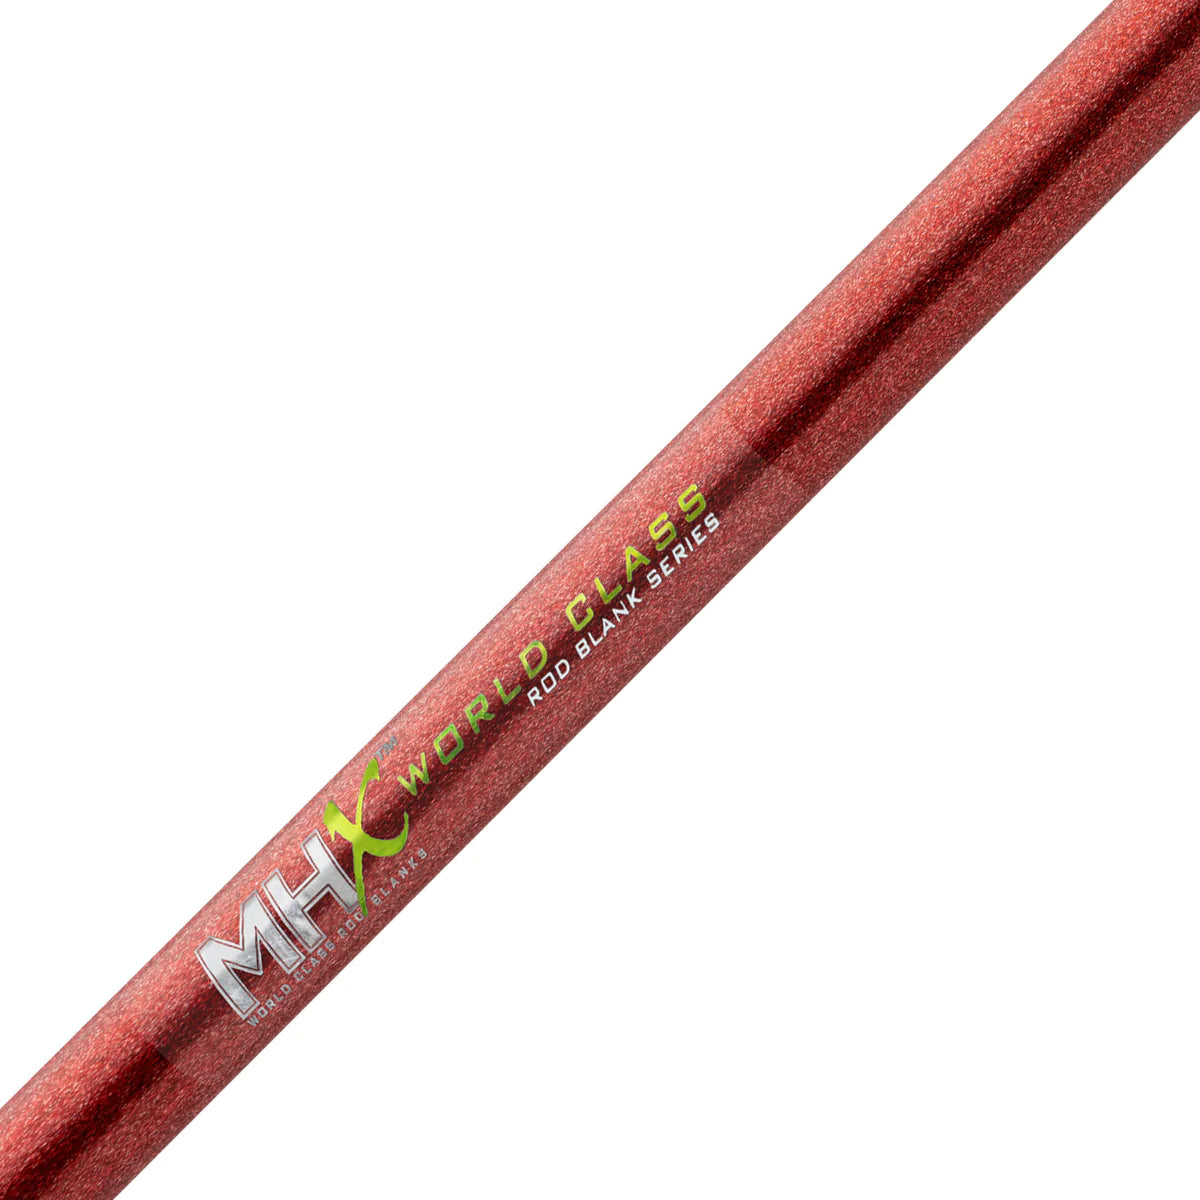 MHX 7'0 Med-Heavy Mag Taper Rod Blank - MB843 – Element Fishing Tackle